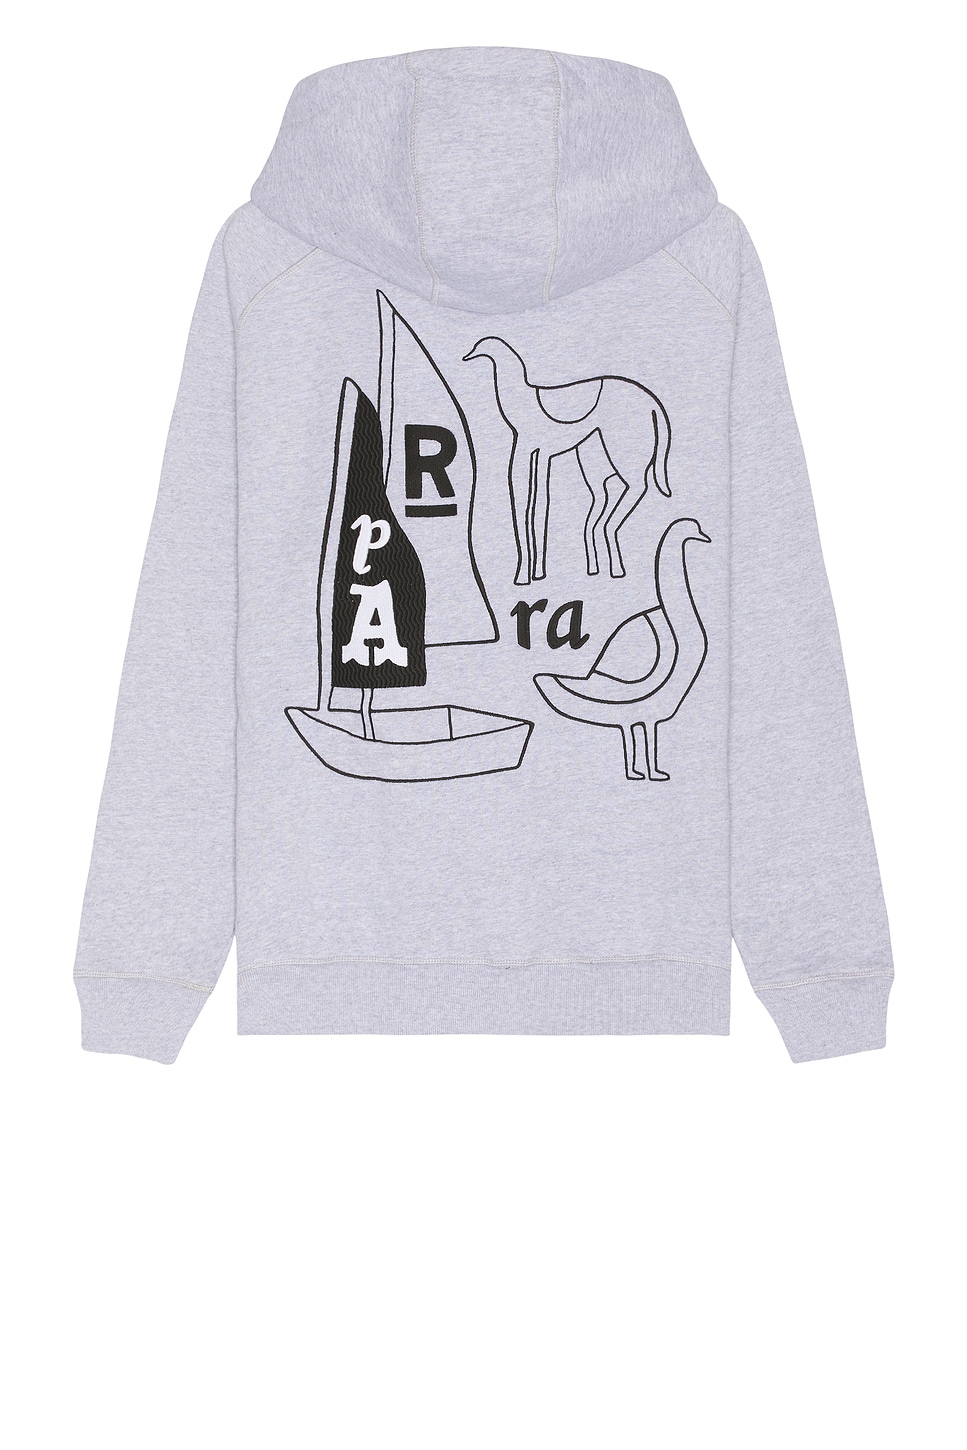 Image 1 of By Parra Riddle Hooded Sweatshirt in Heather Grey